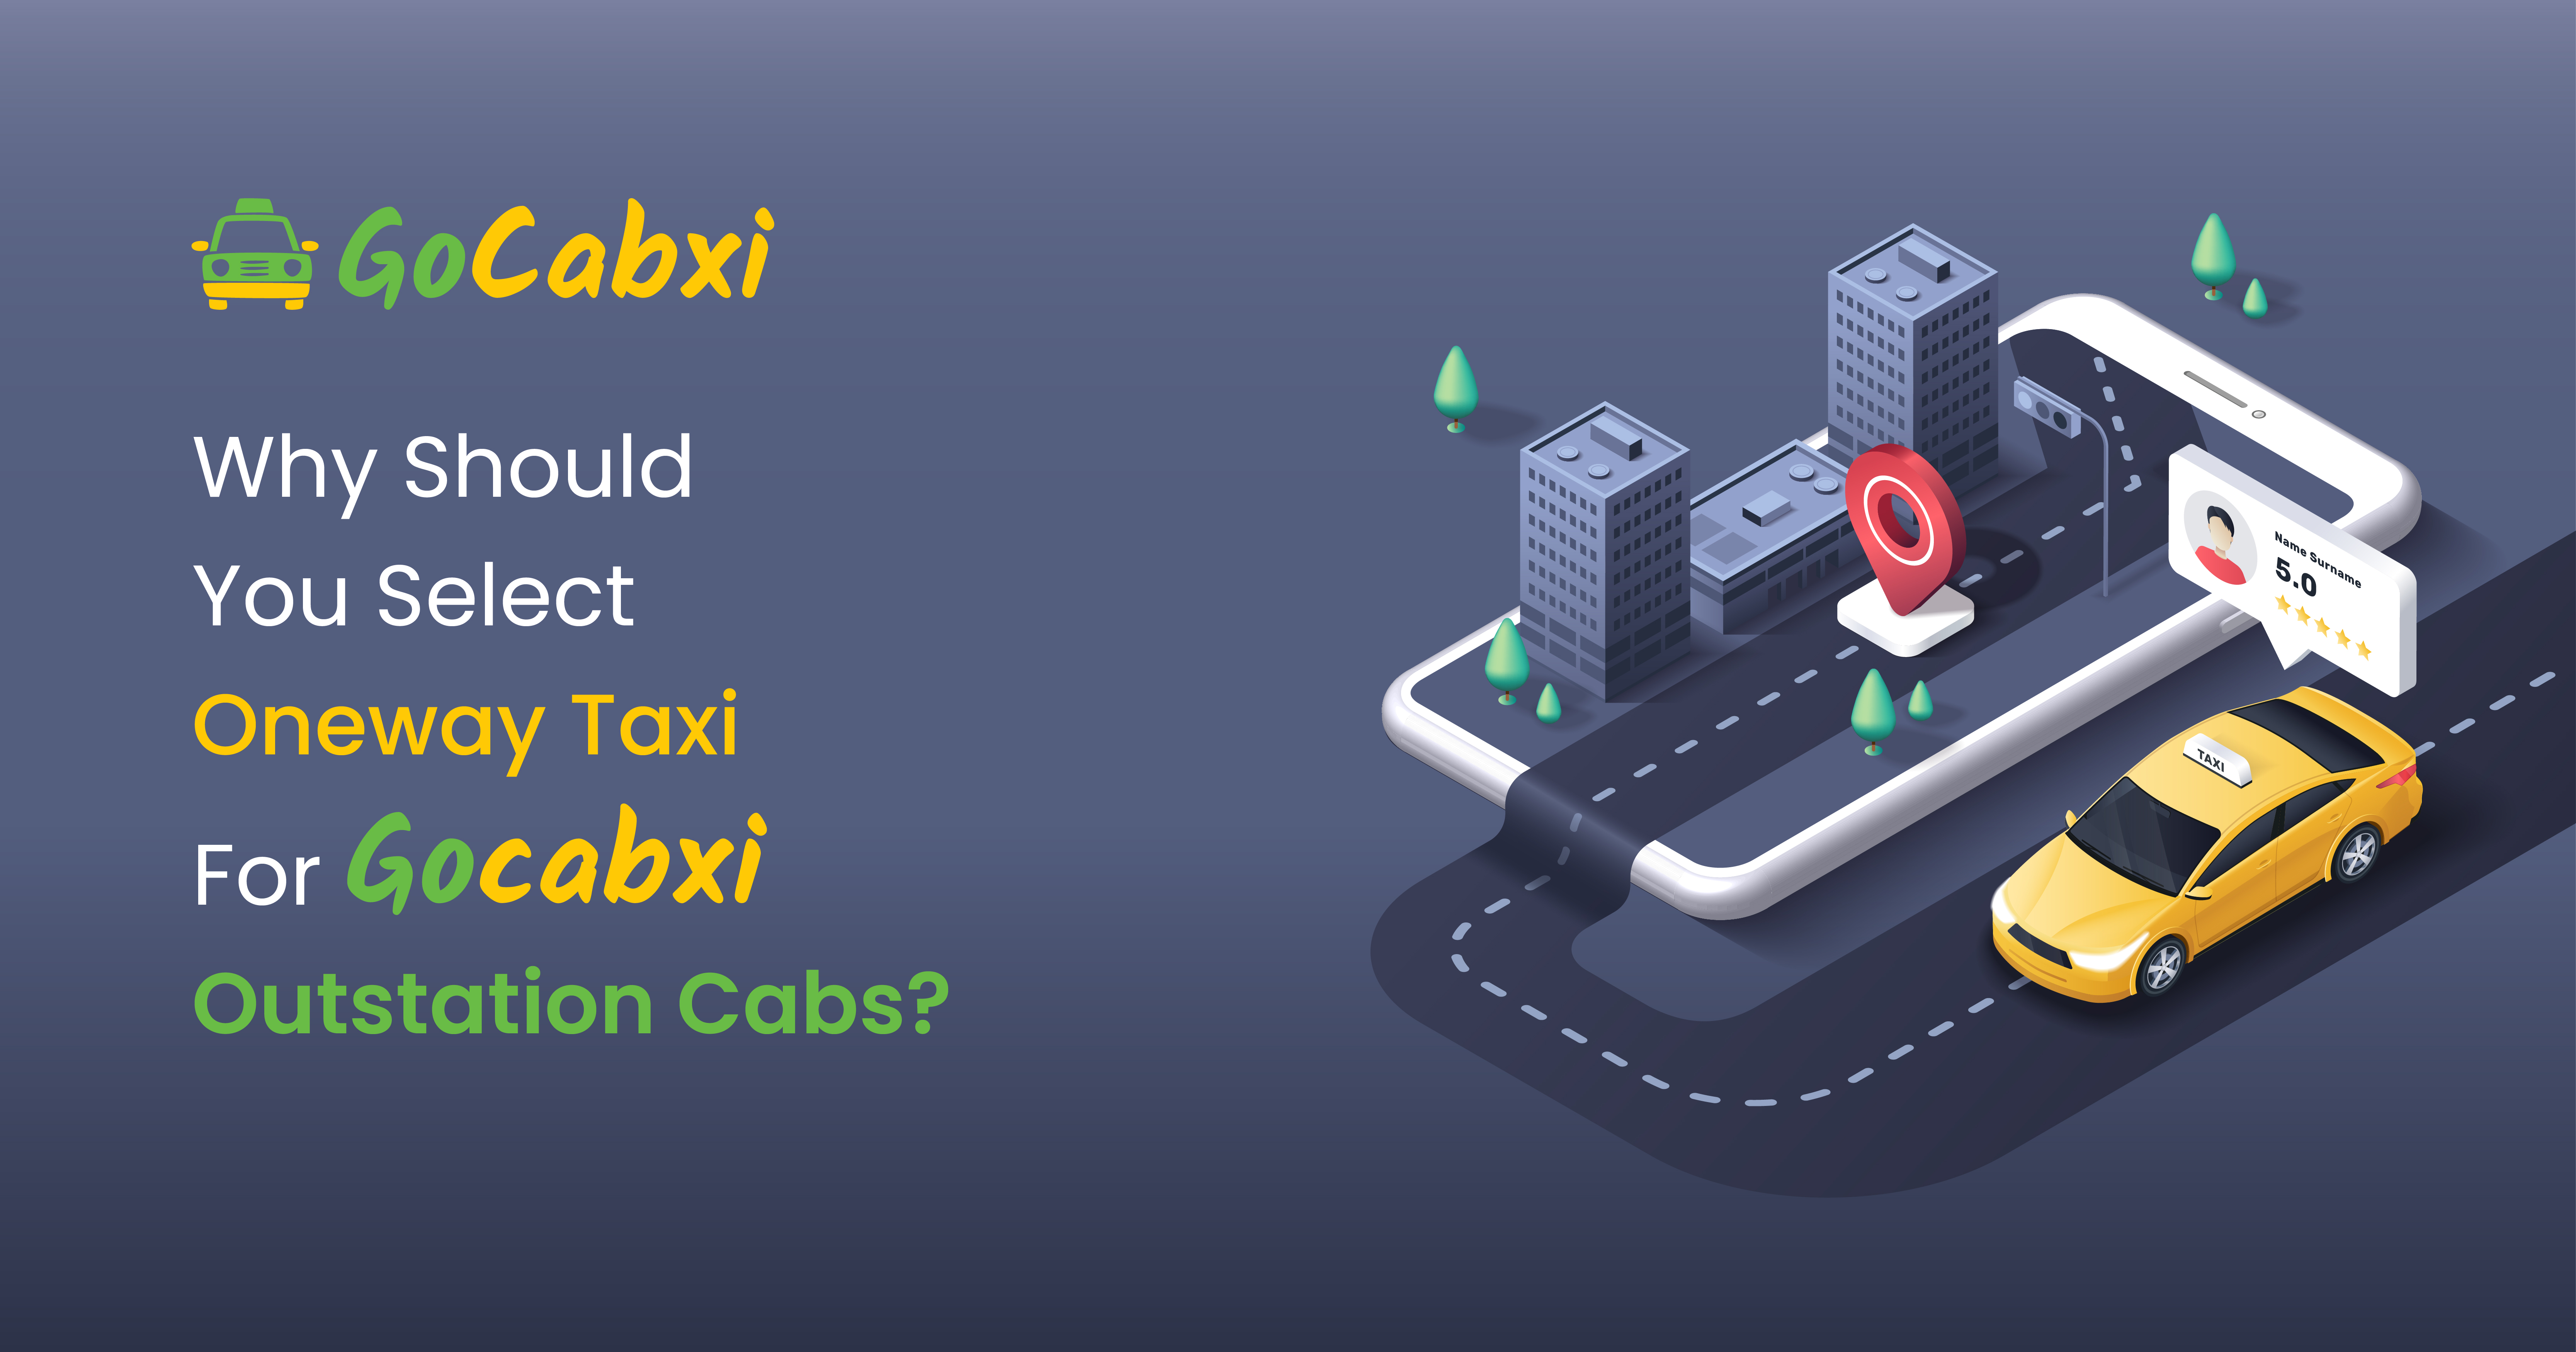 Why Should You Select Oneway Taxi For Gocabxi Outstation Cabs?